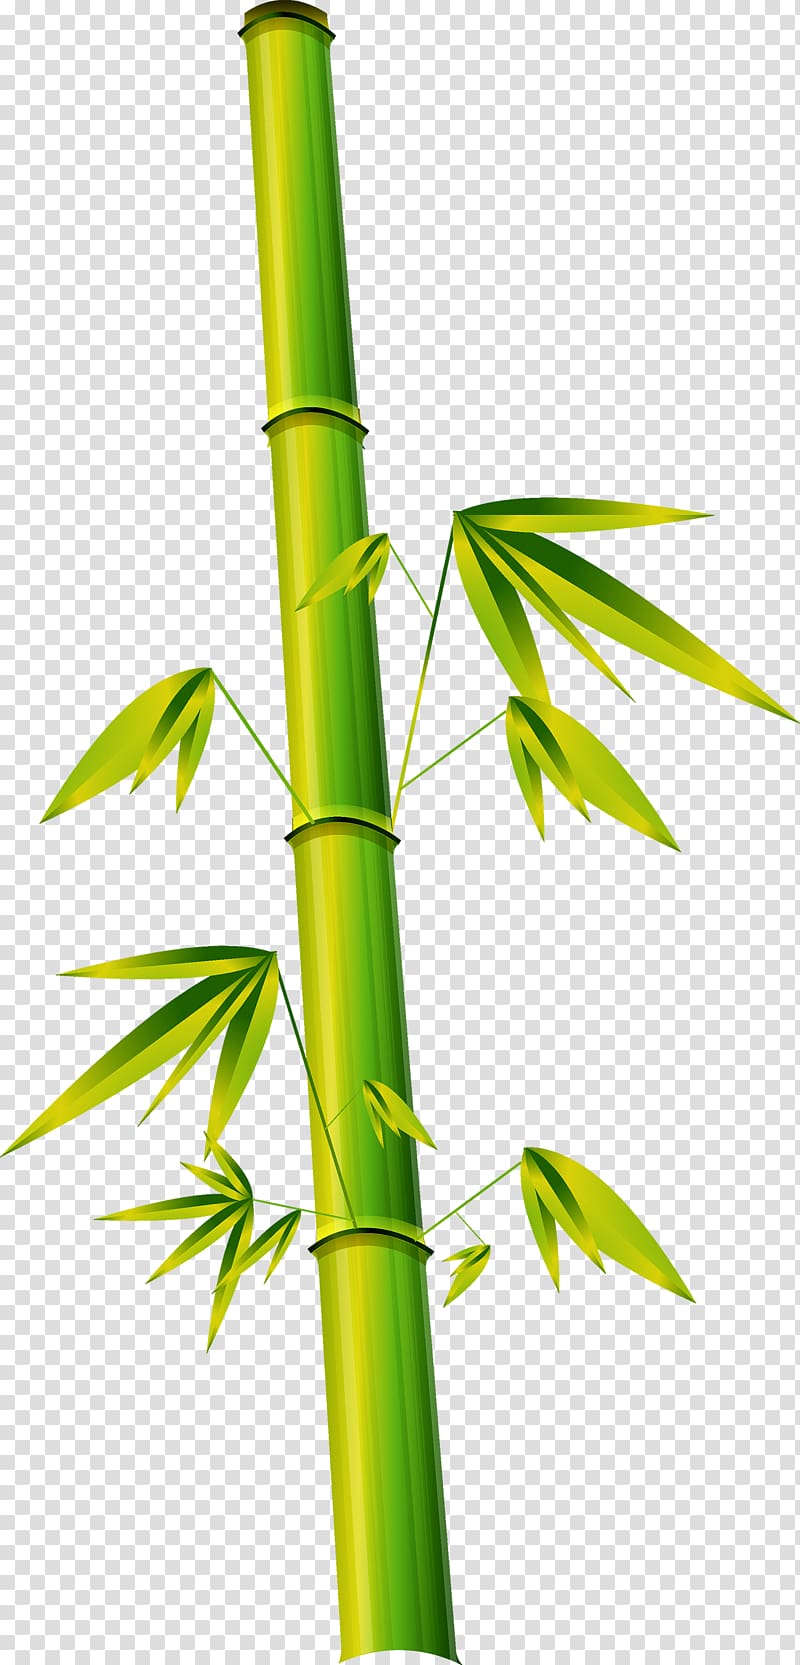 Bamboe Bamboo Phyllostachys Euclidean , Green Bamboo transparent background PNG clipart